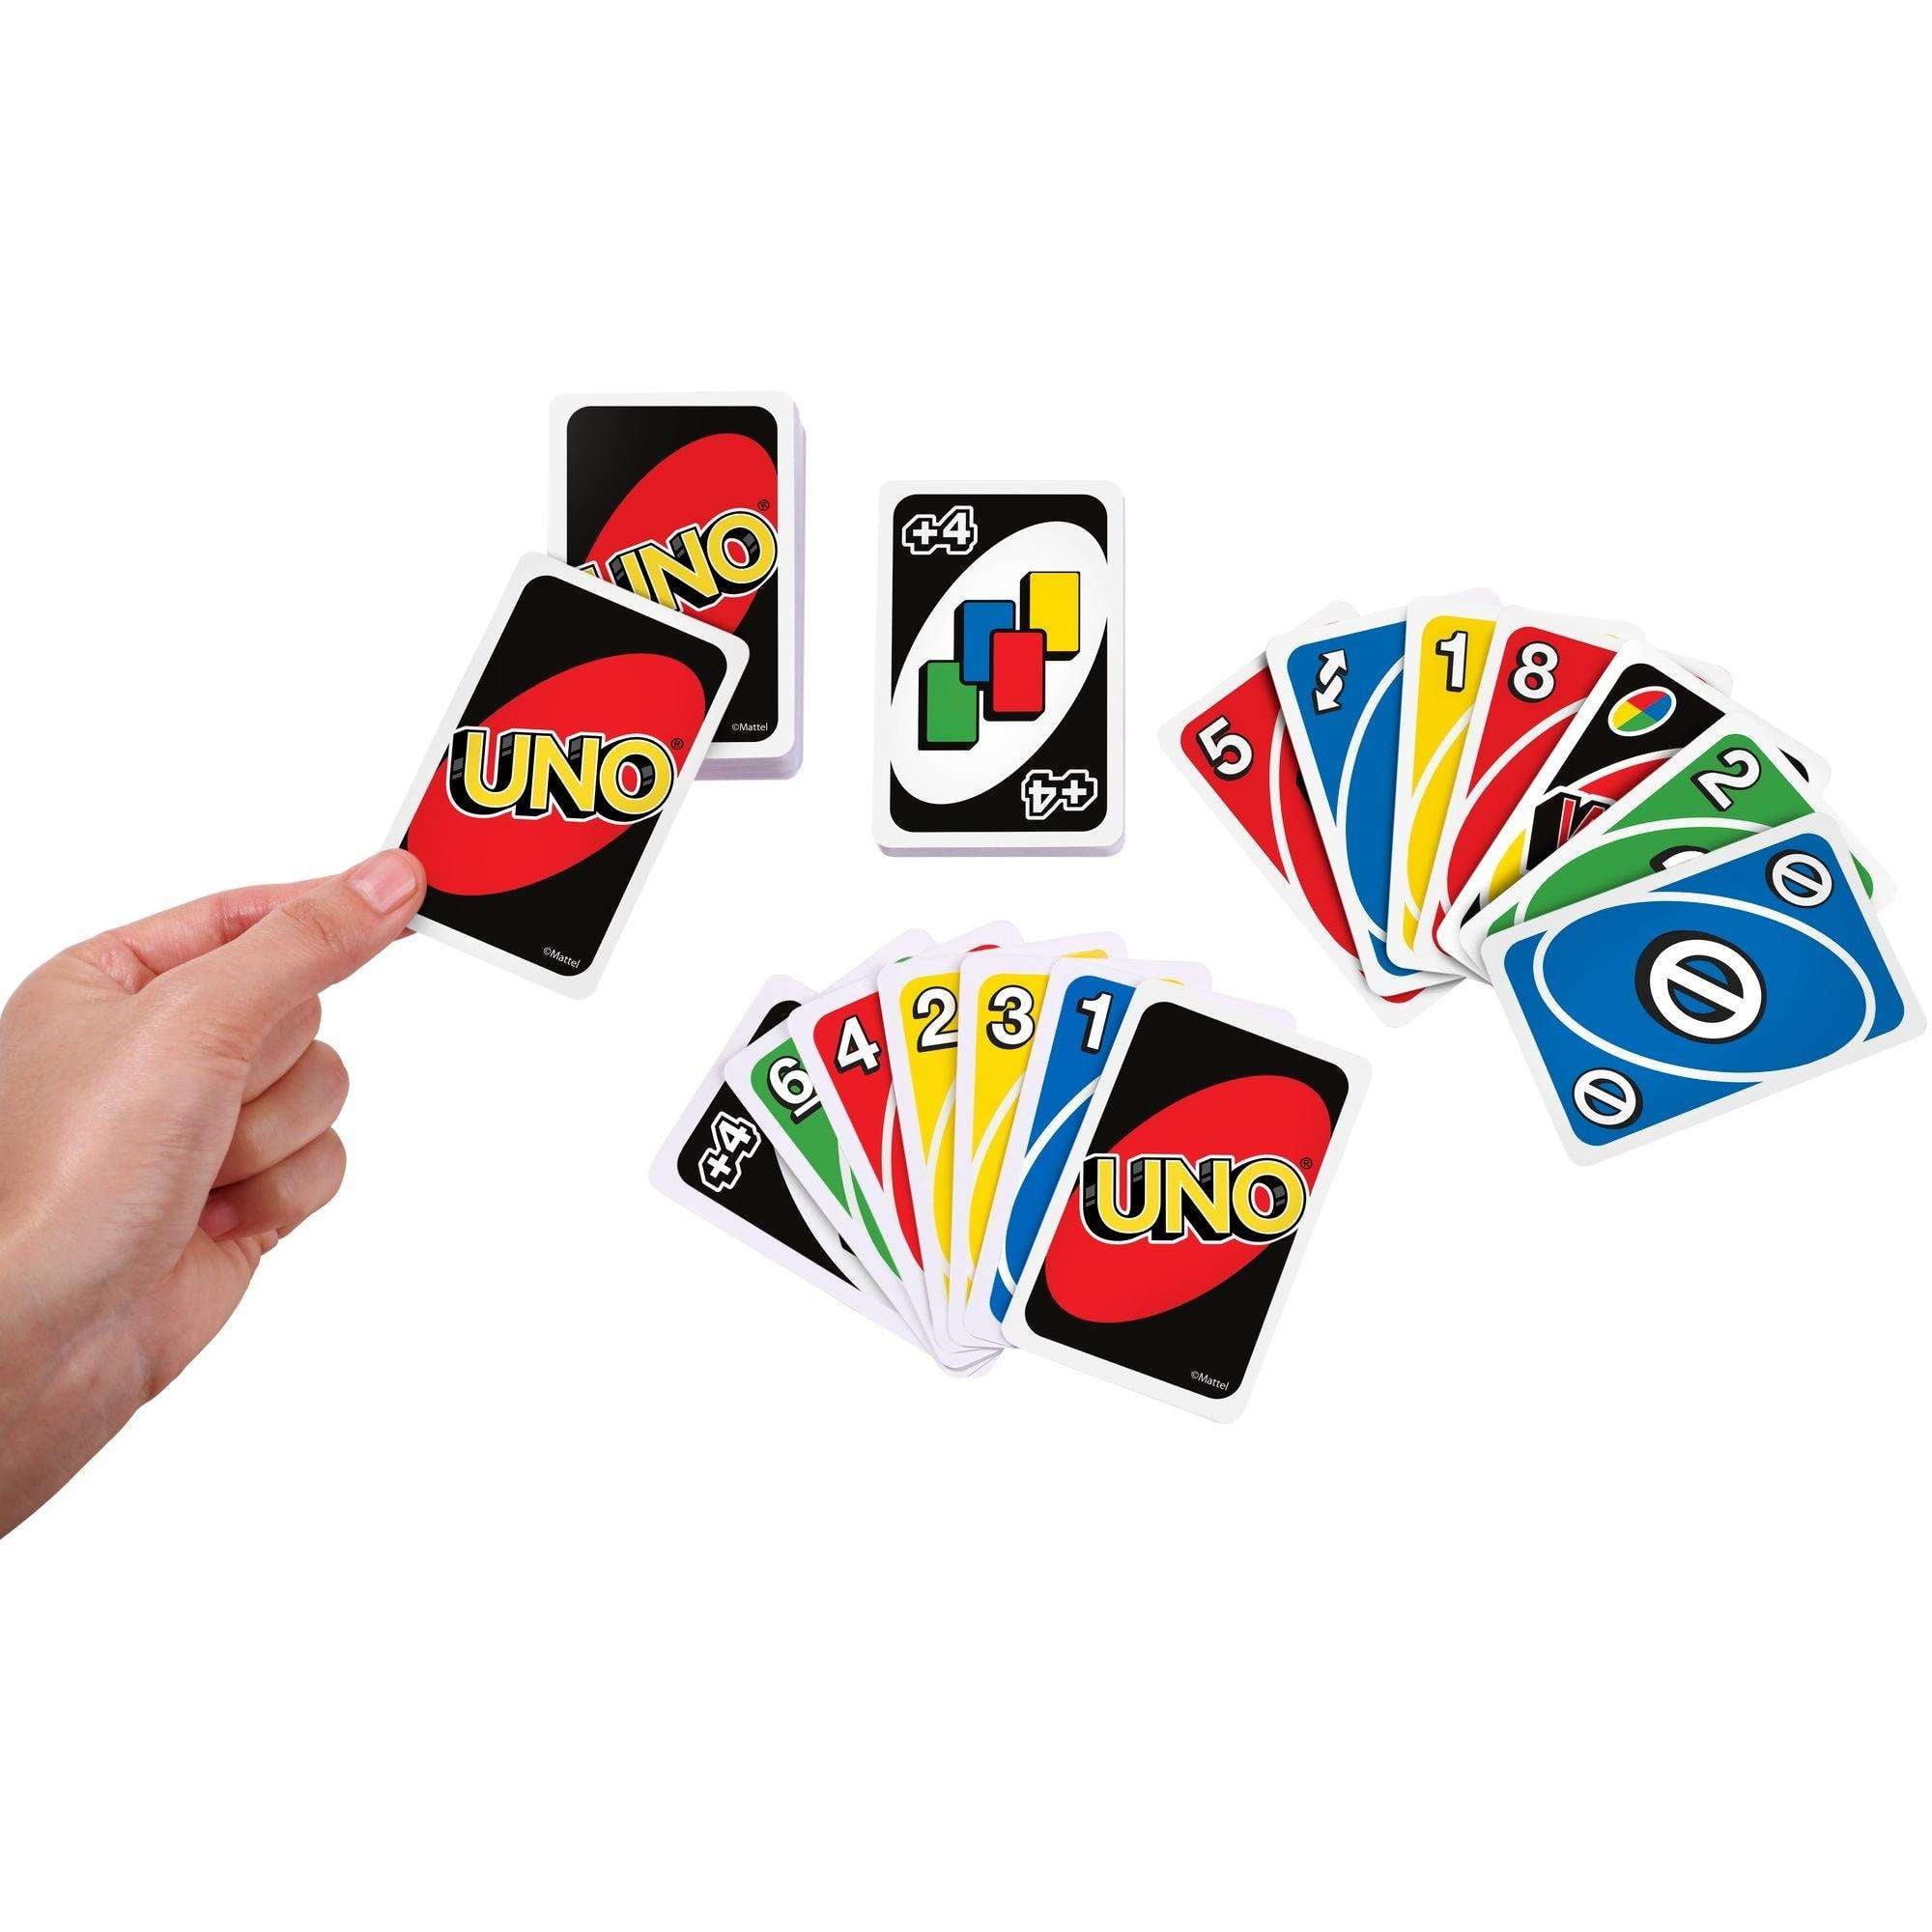 Mattel Games UNO Emoji Card Game 2-10 Players 7 for sale online 